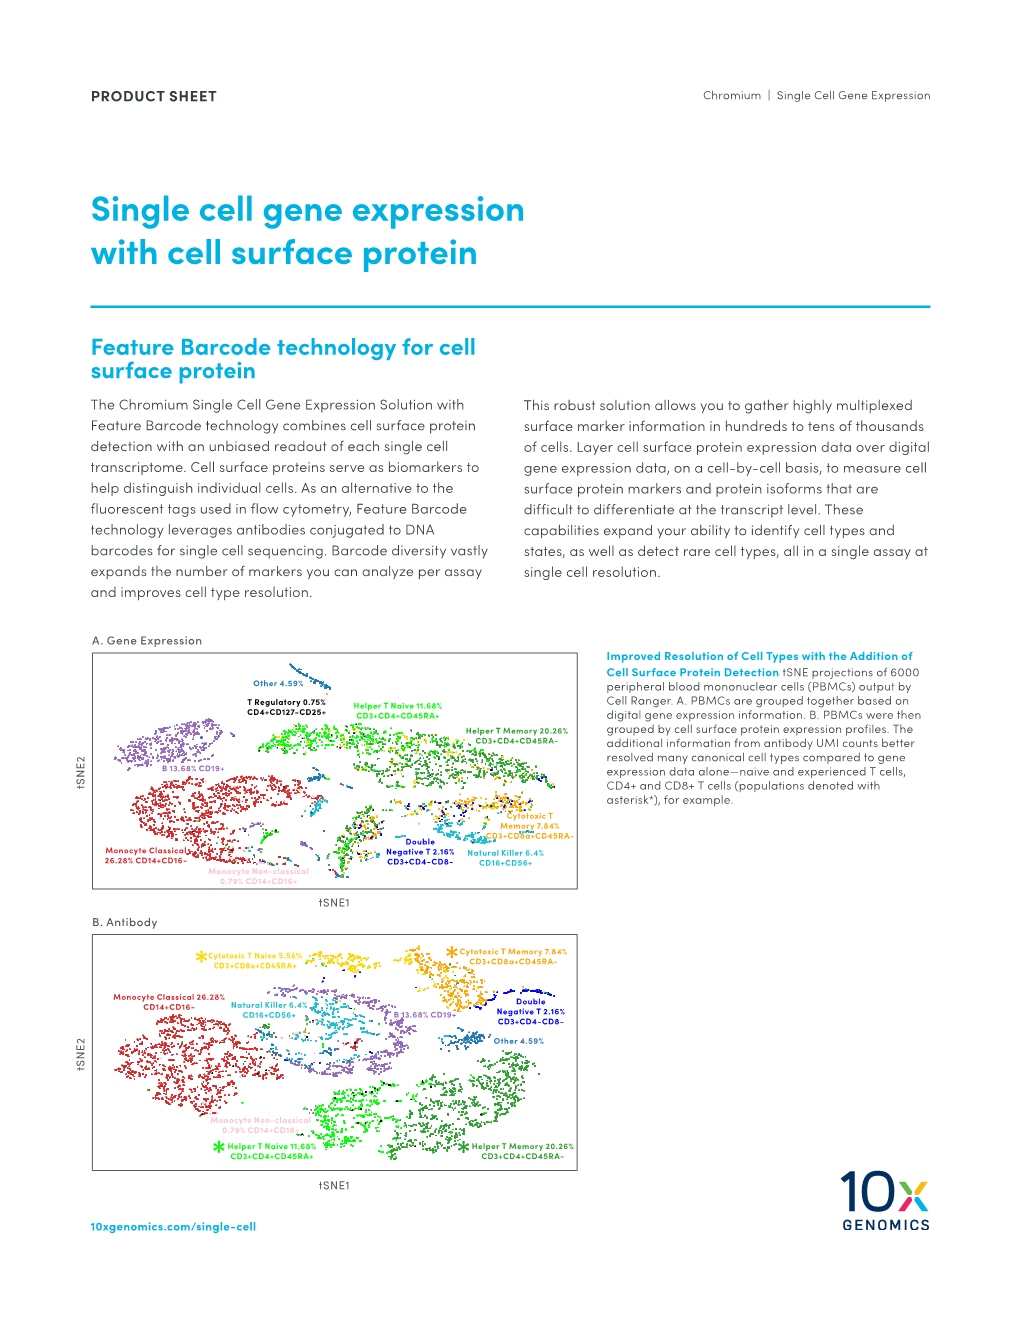 Chromium Single Cell Gene Expression Cell Surface Protein Product Sheet